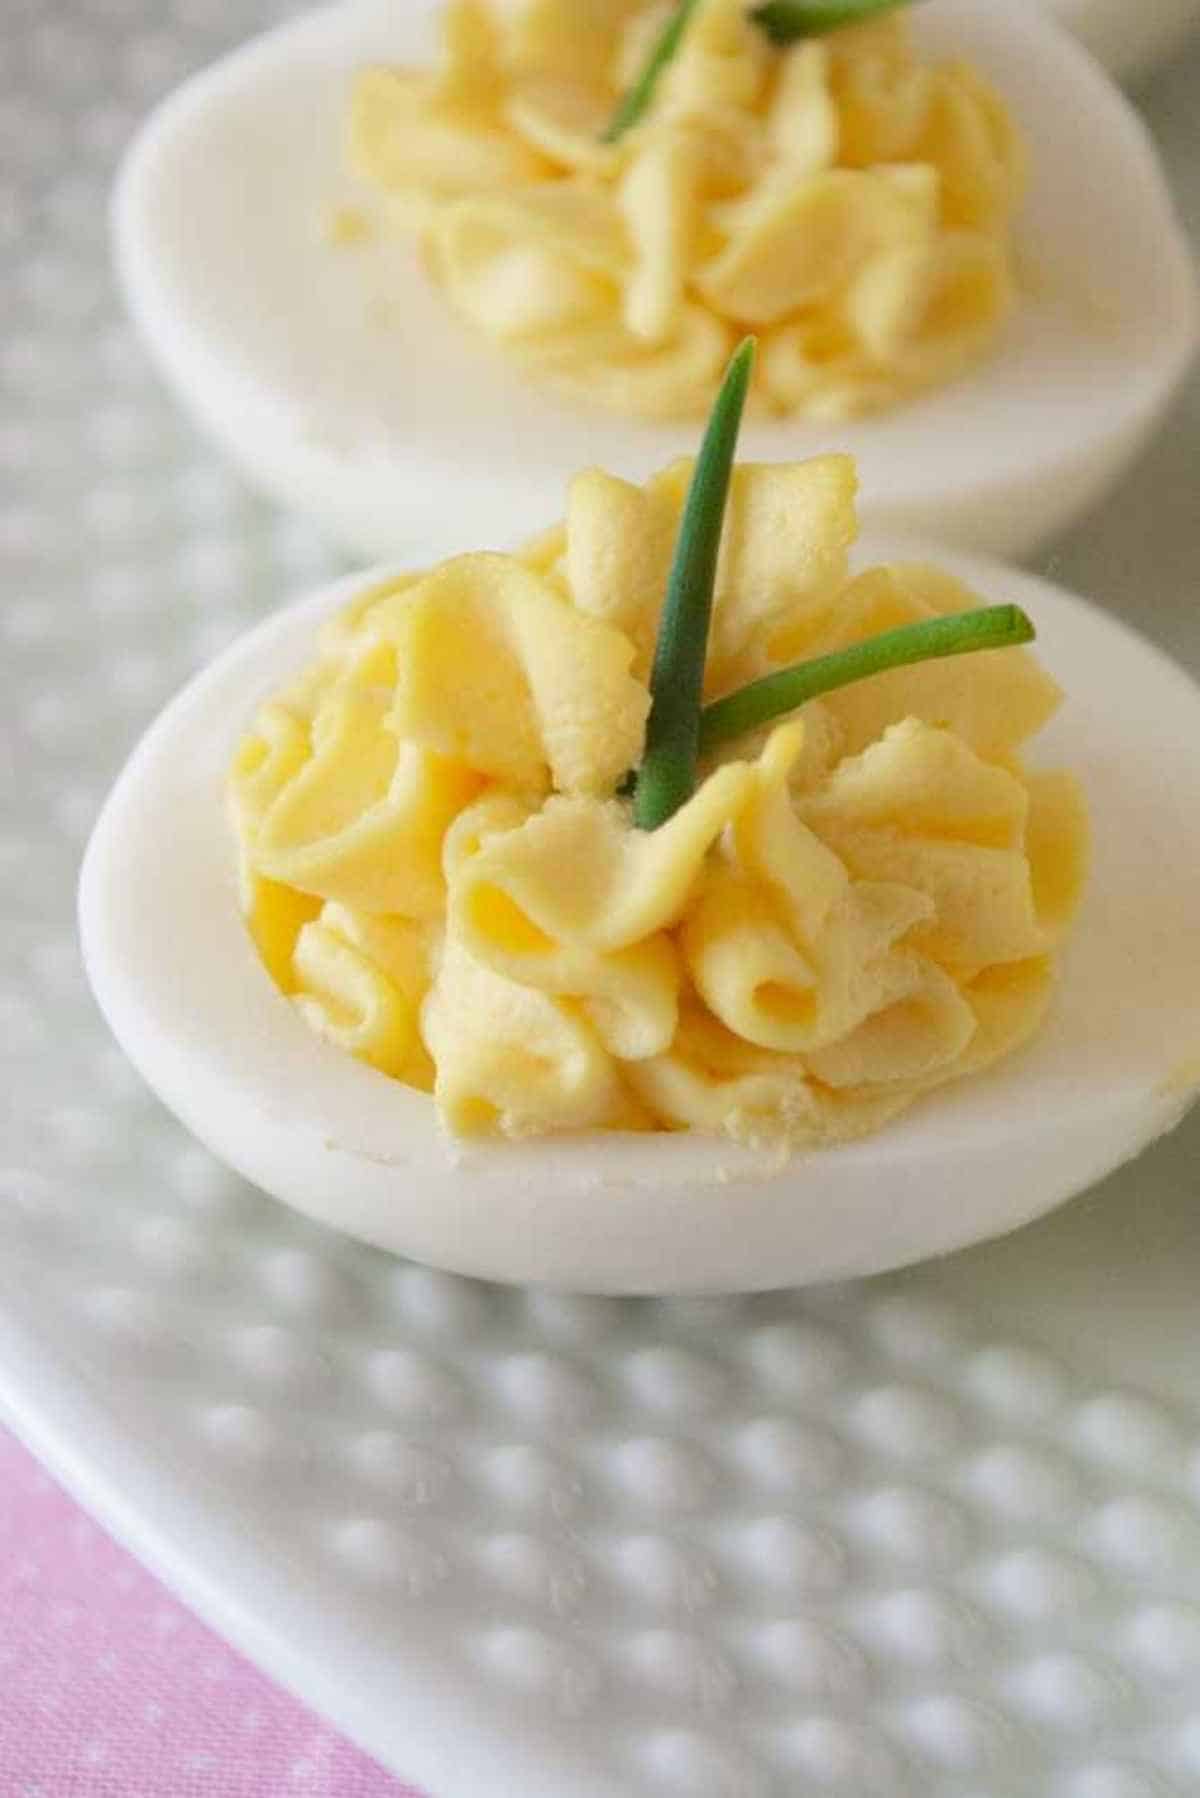 A classic deviled egg recipe with a subtle pickle flavor!